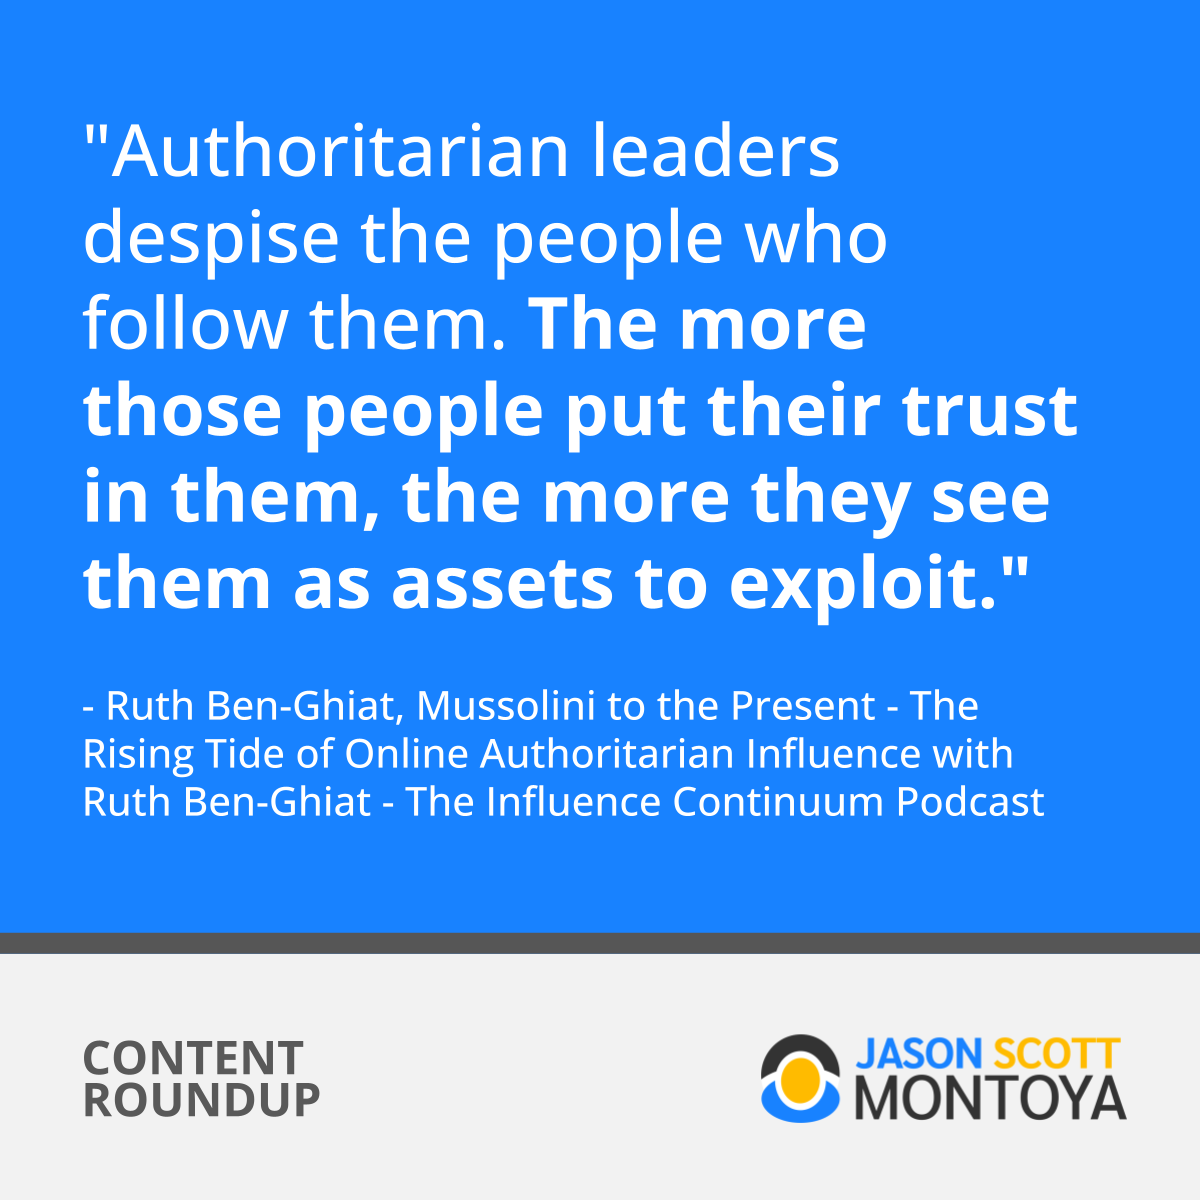 "Authoritarian leaders despise the people who follow them. The more those people put their trust in them, the more they see them as assets to exploit." - Ruth Ben-Ghiat